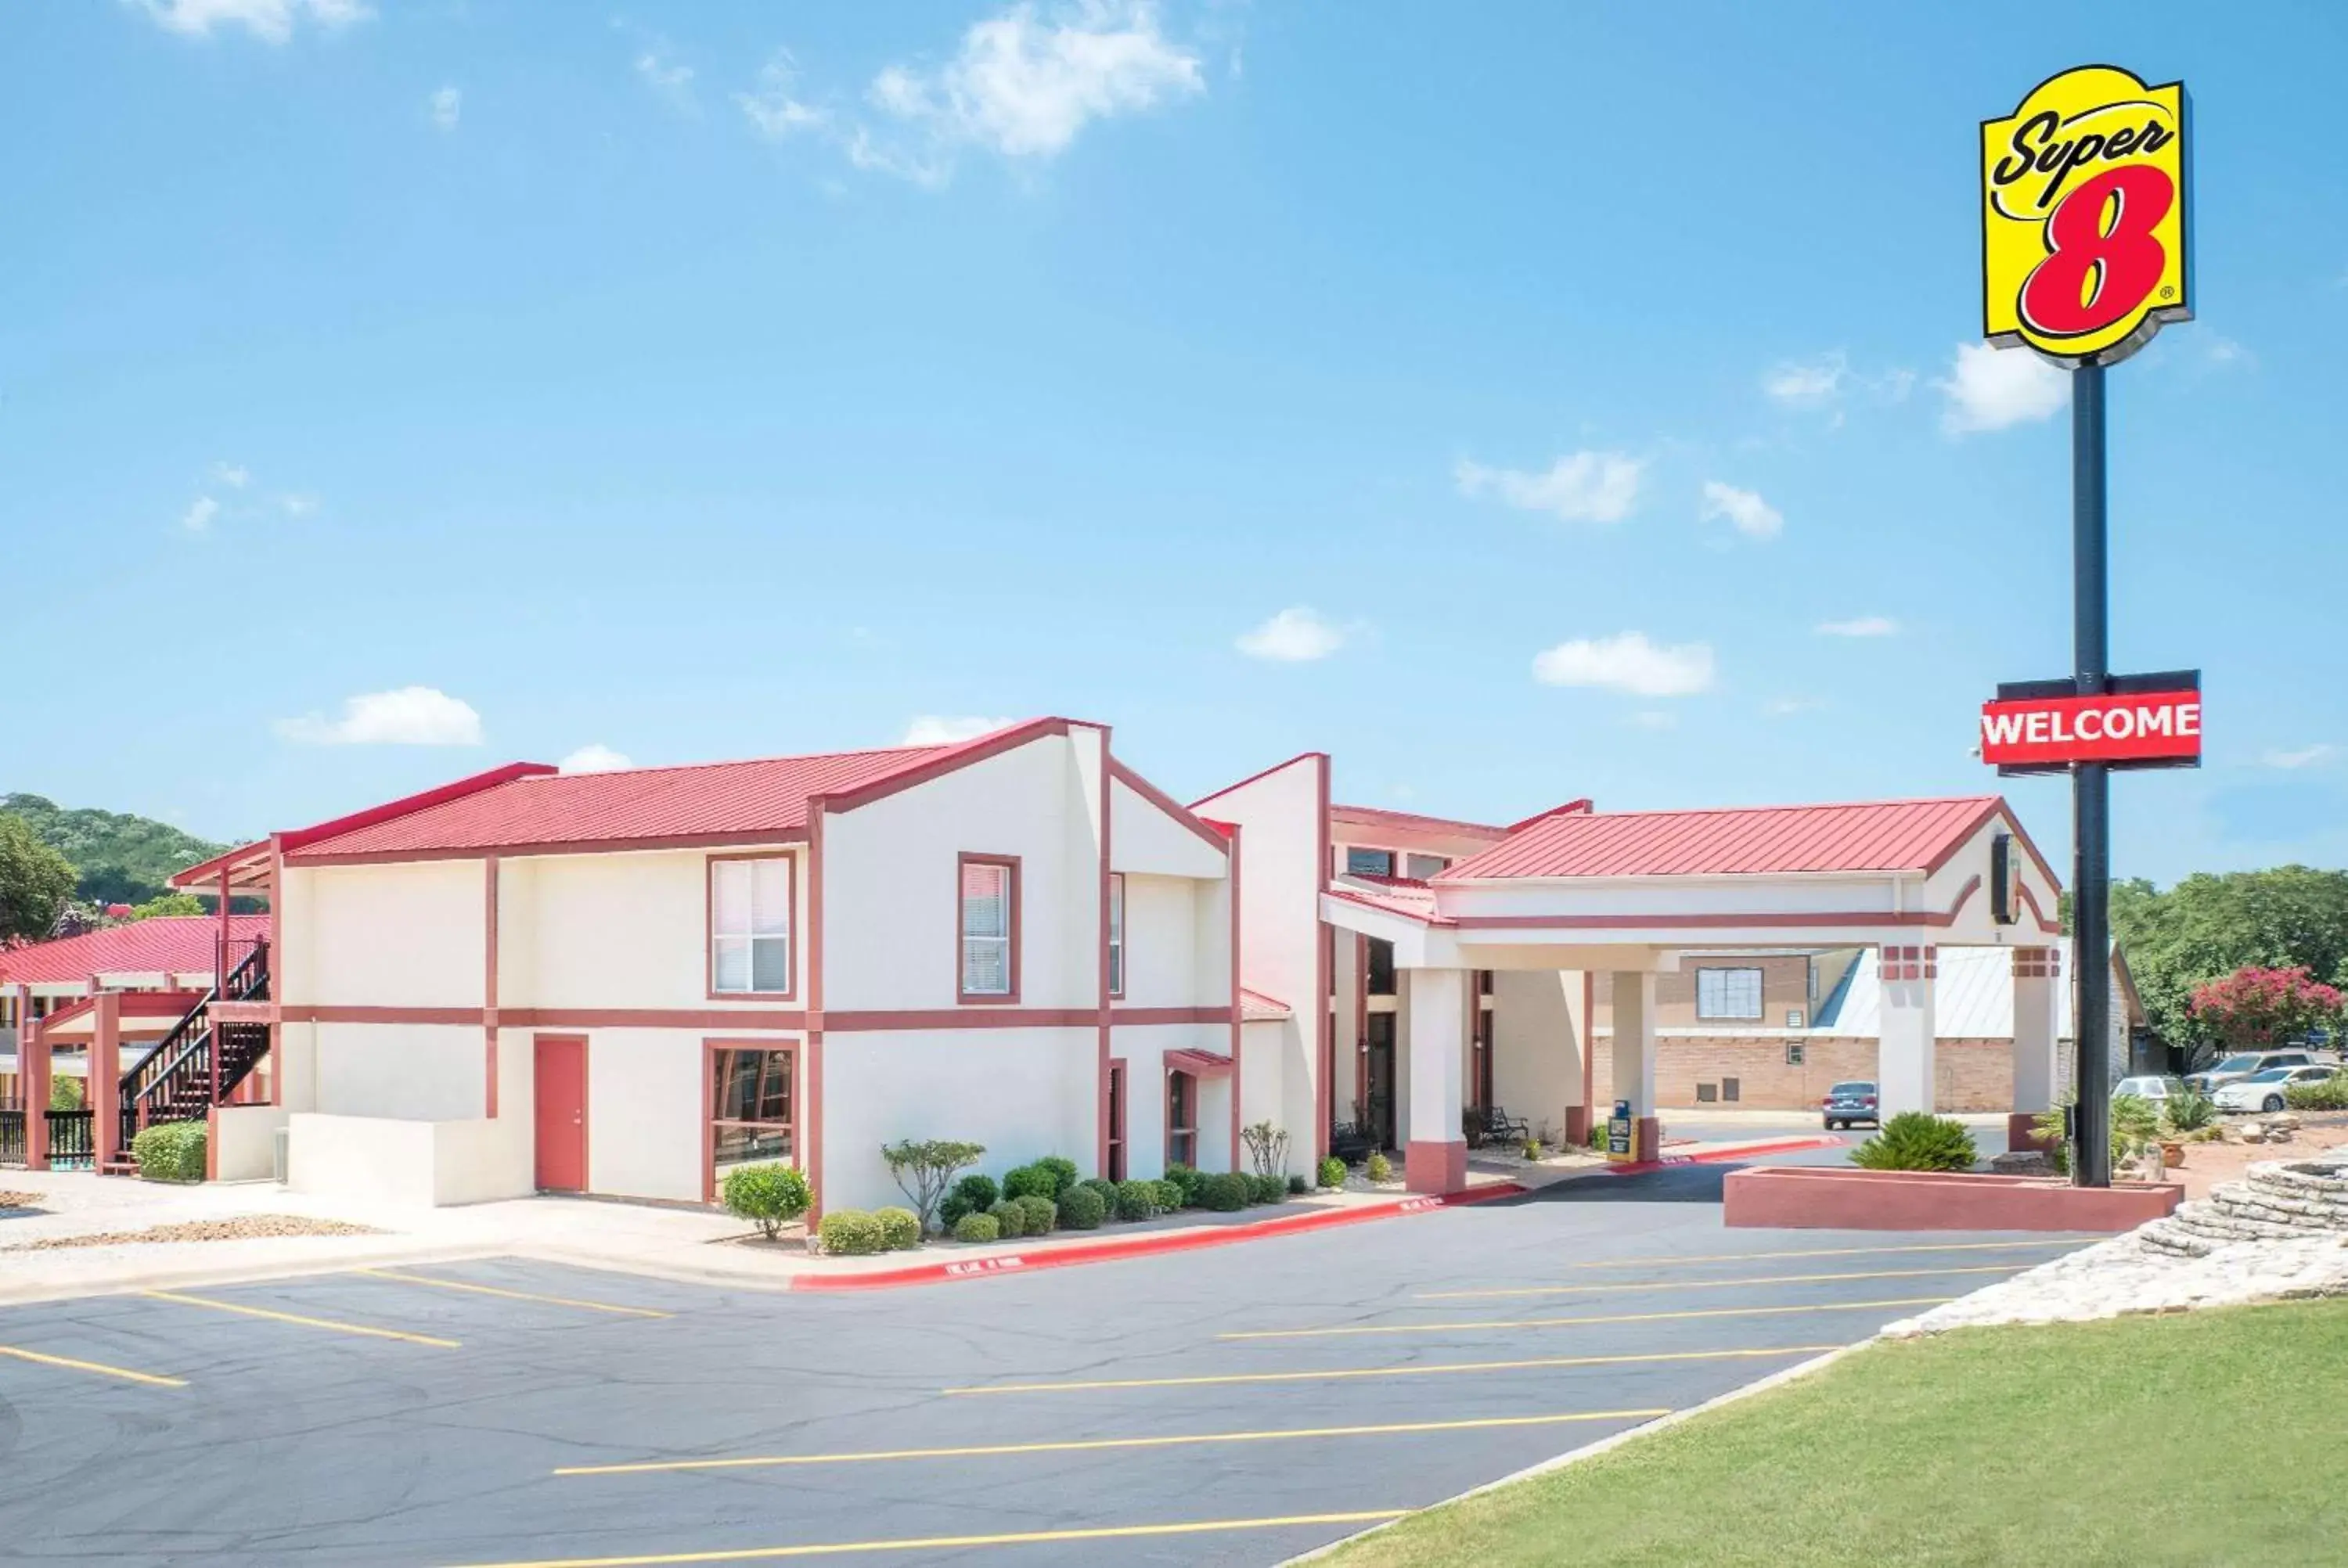 Property Building in Super 8 by Wyndham Kerrville TX